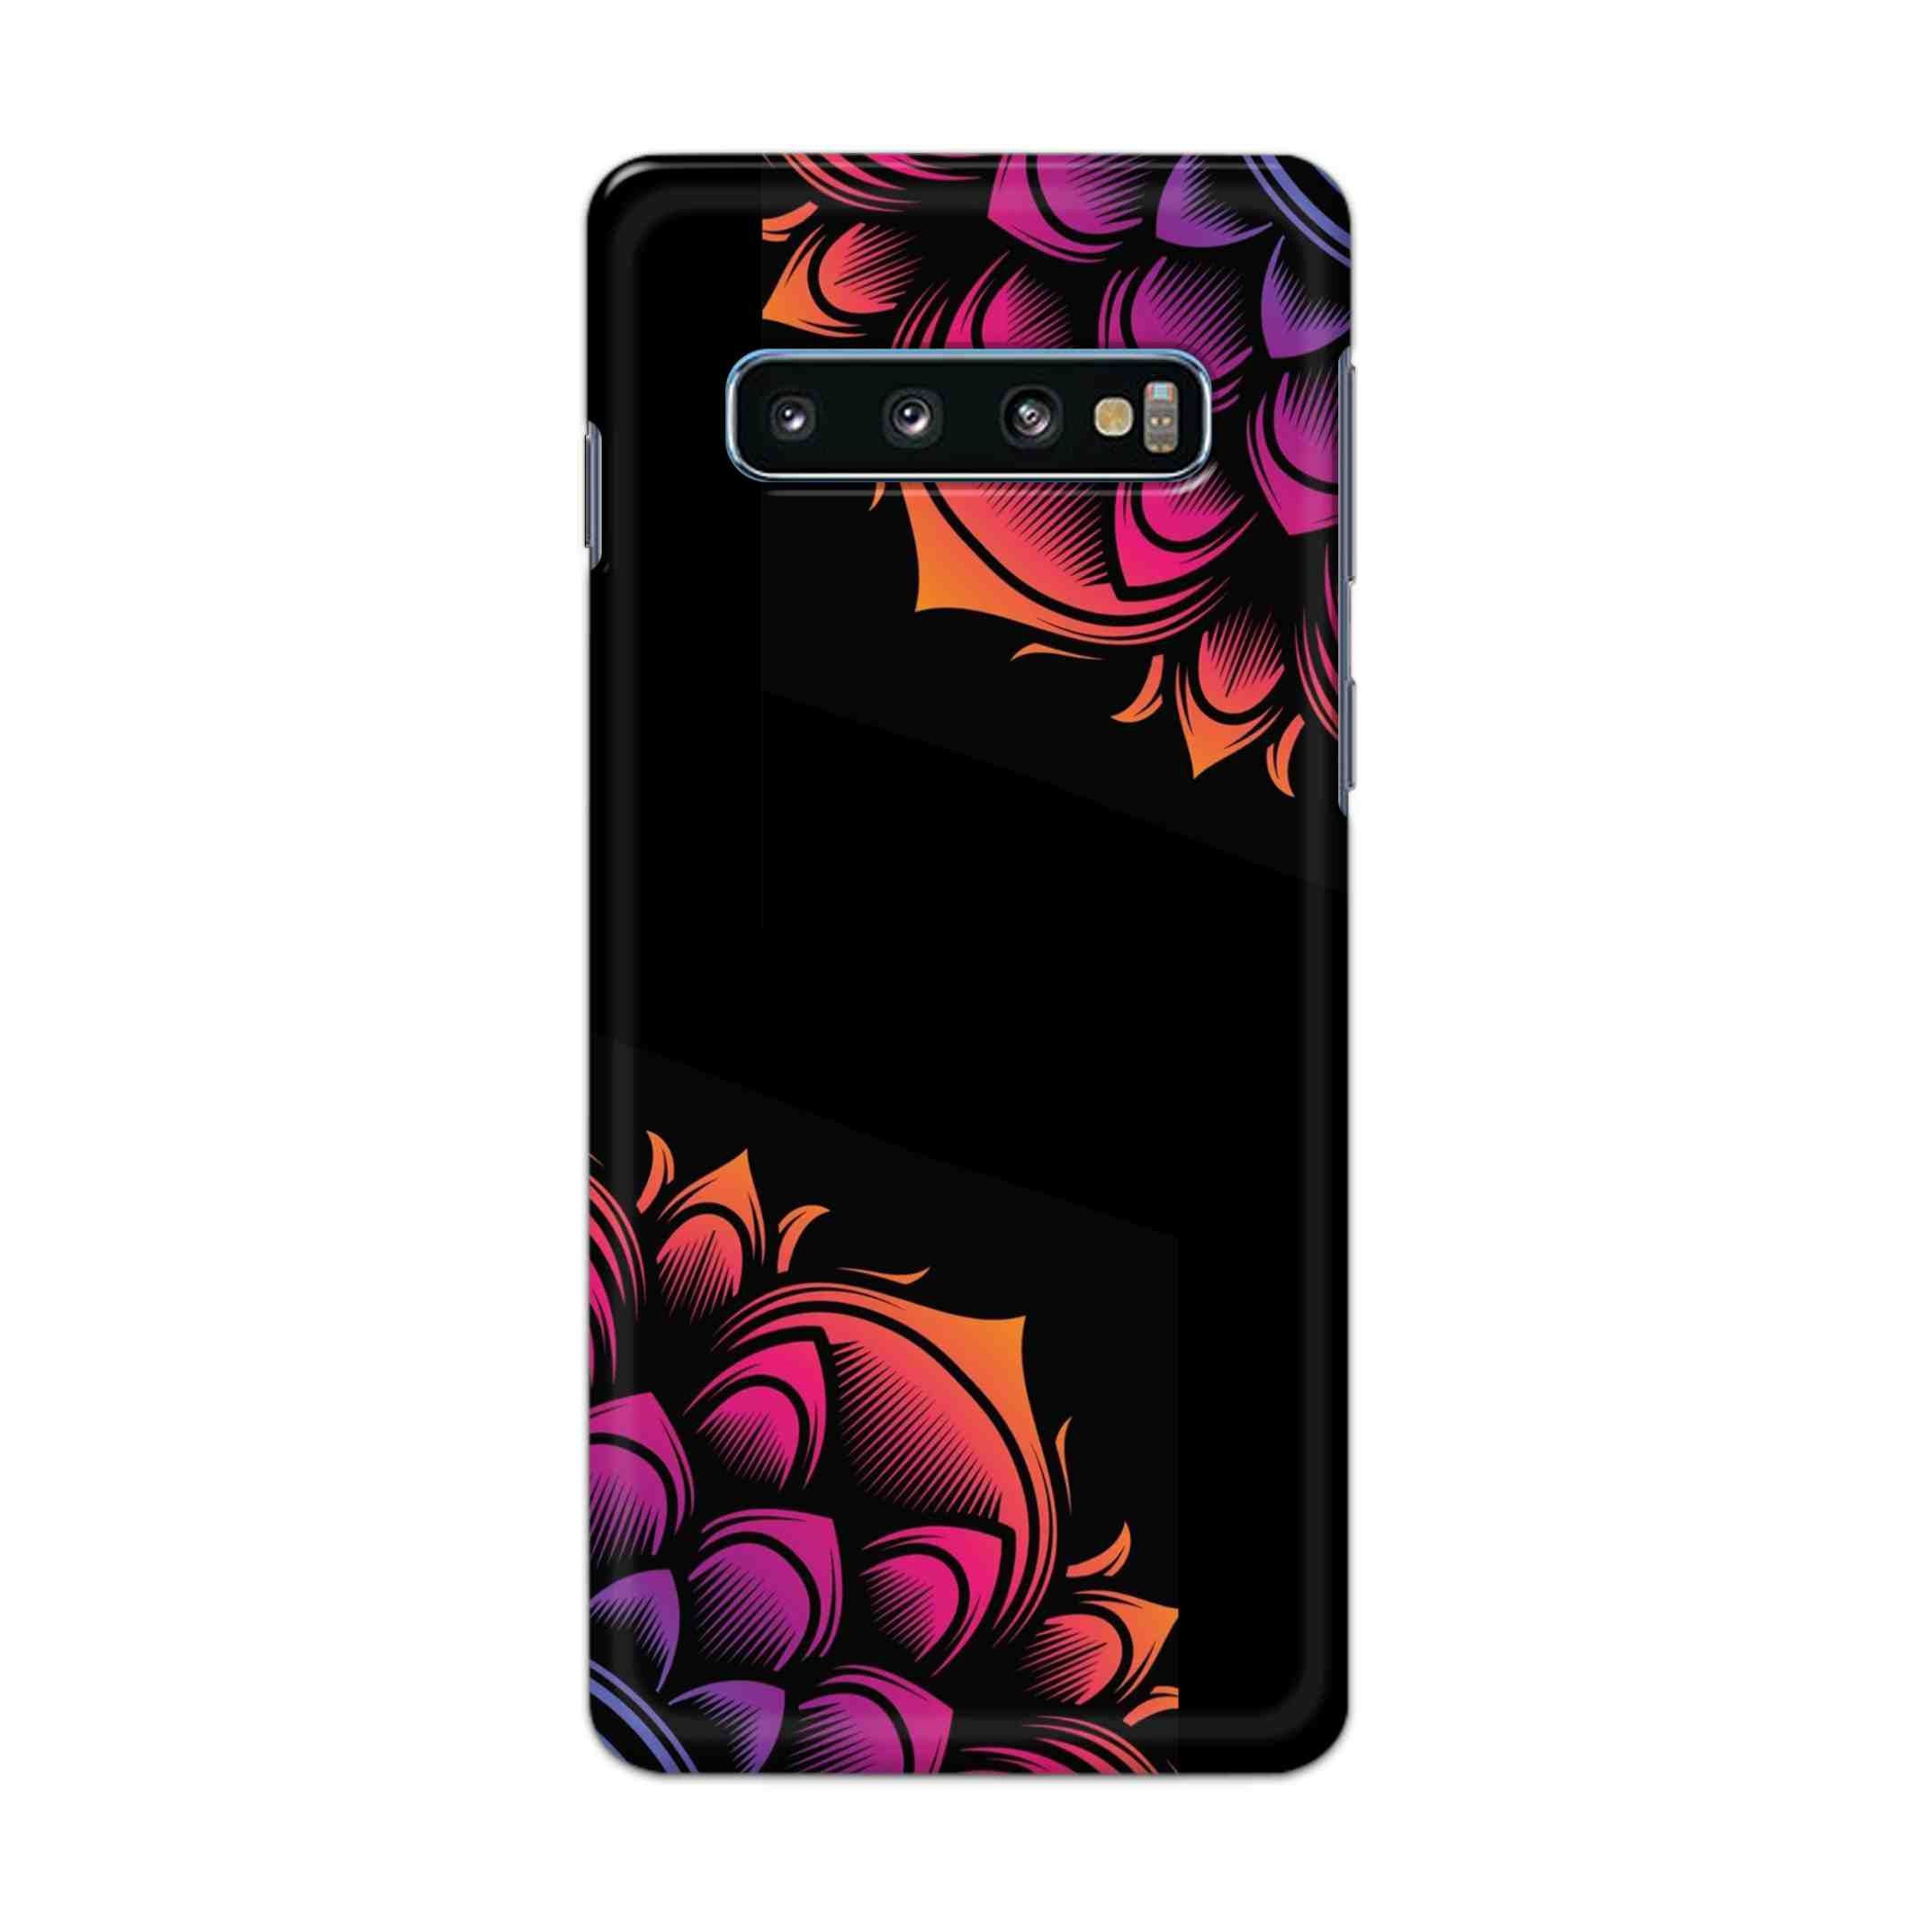 Buy Mandala Hard Back Mobile Phone Case Cover For Samsung Galaxy S10 Plus Online